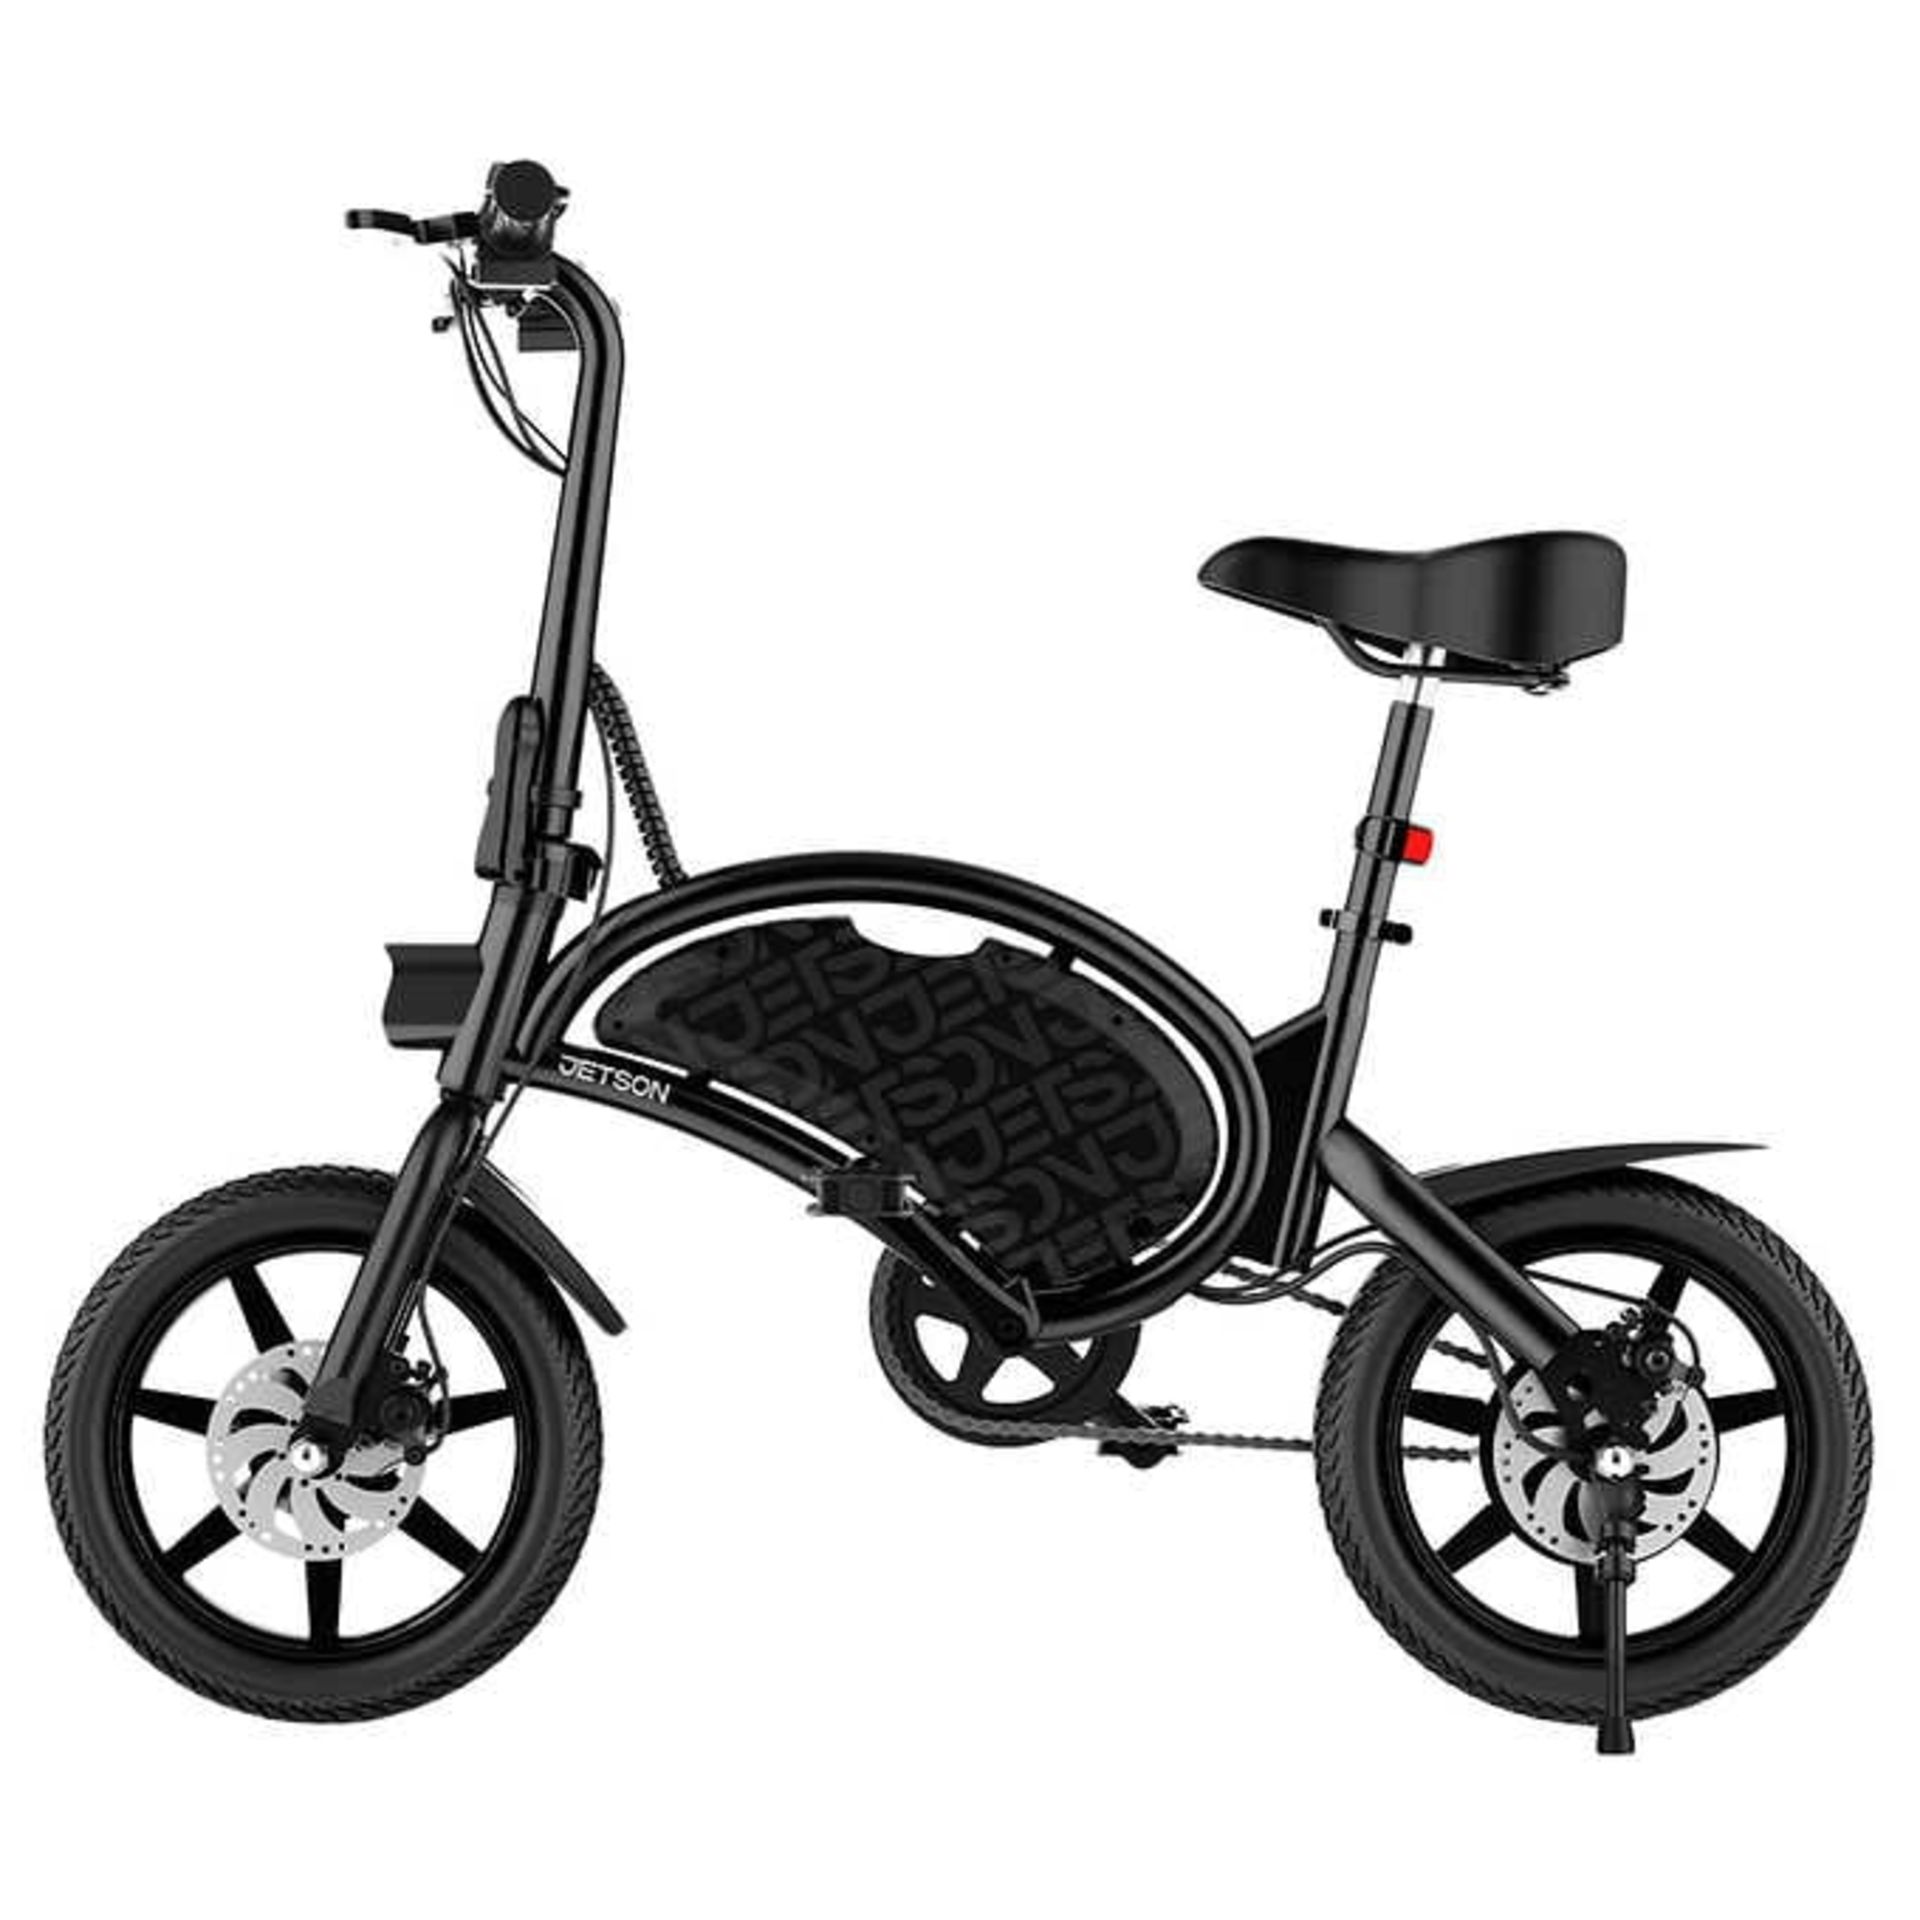 1 JETSON BOLT PRO FOLDING PEDAL ELECTRIC BIKE WITH CHARGER RRP Â£399 (GENERIC IMAGE GUIDE)